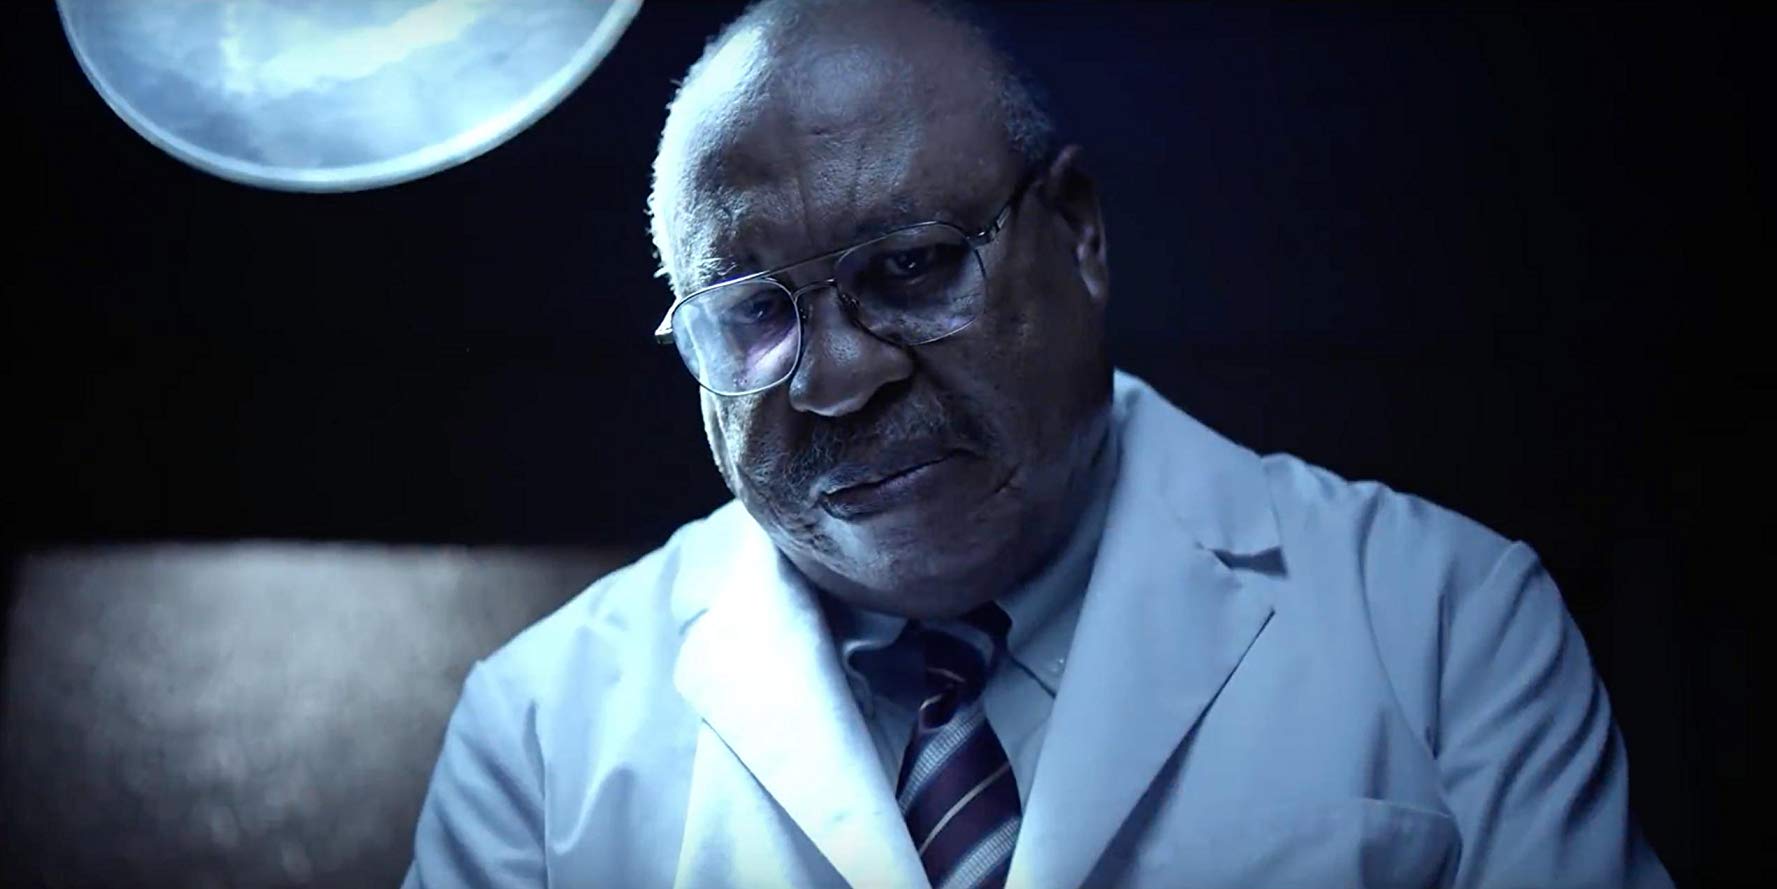 Watch Gosnell: The Trial of America's Biggest Serial Killer